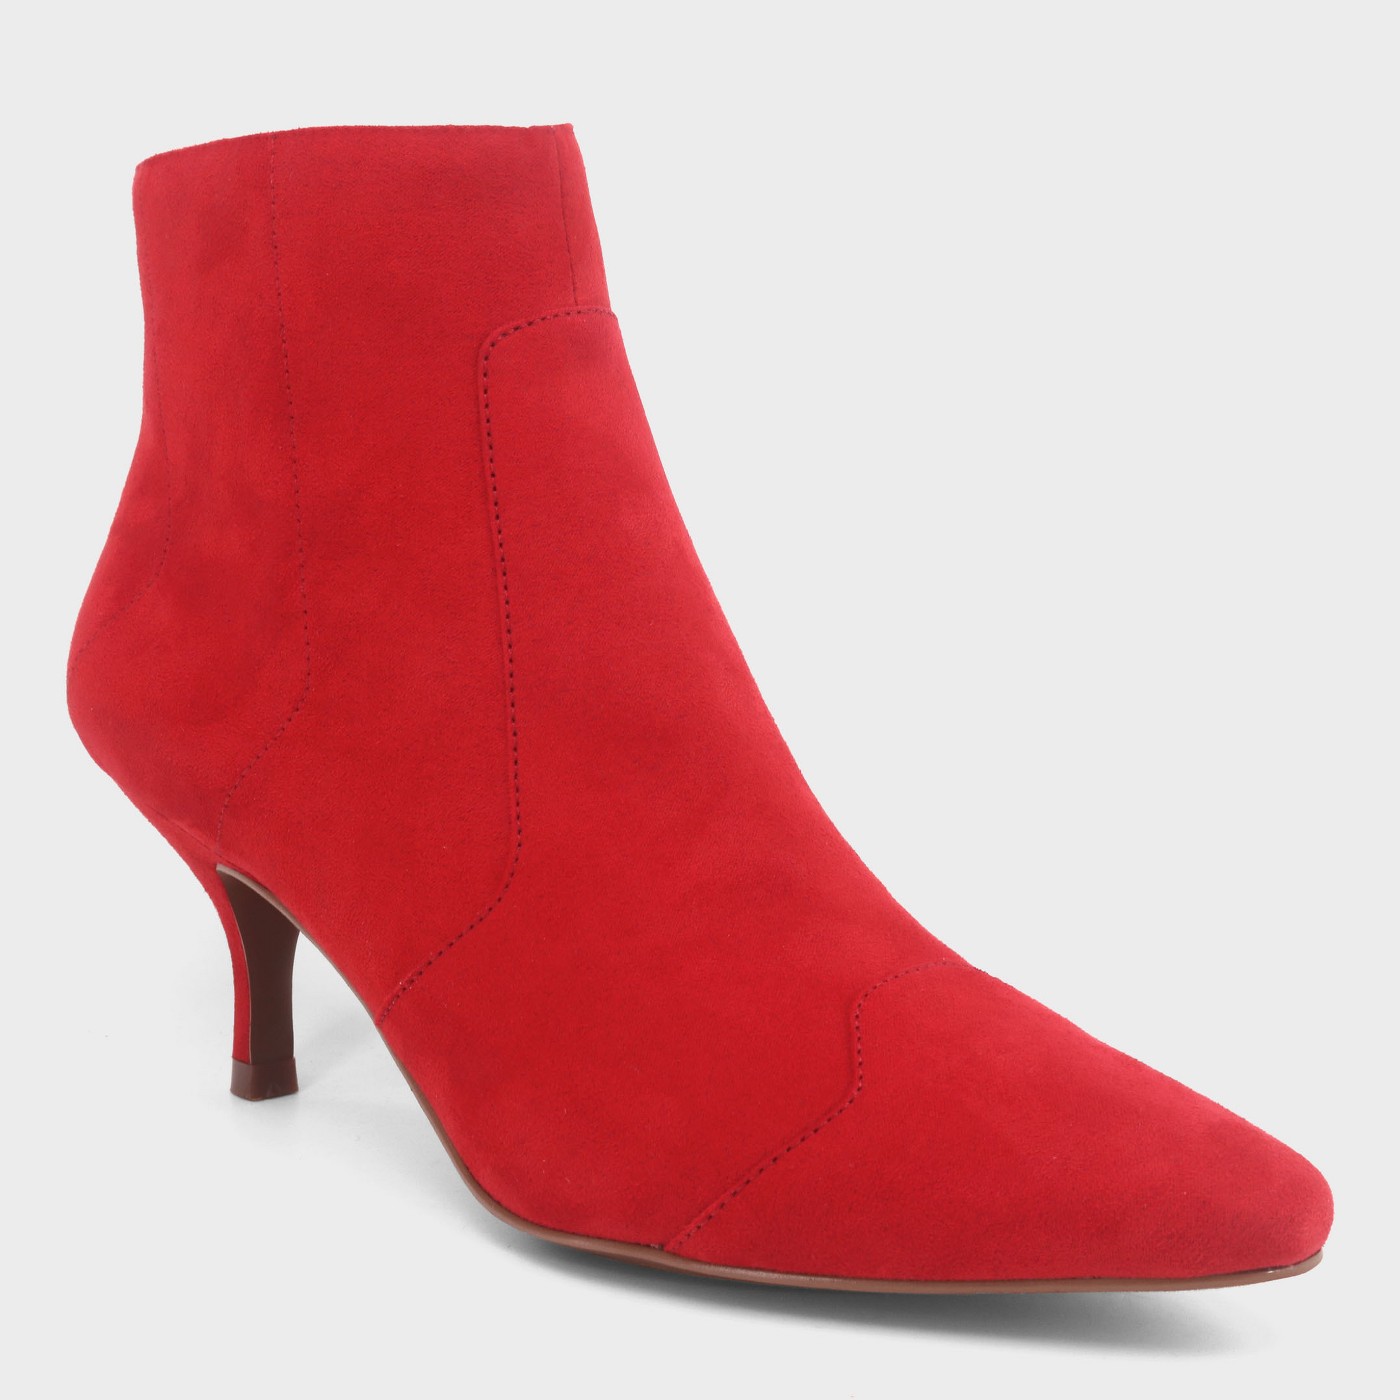 Who What Wear "Delilah" Bootie